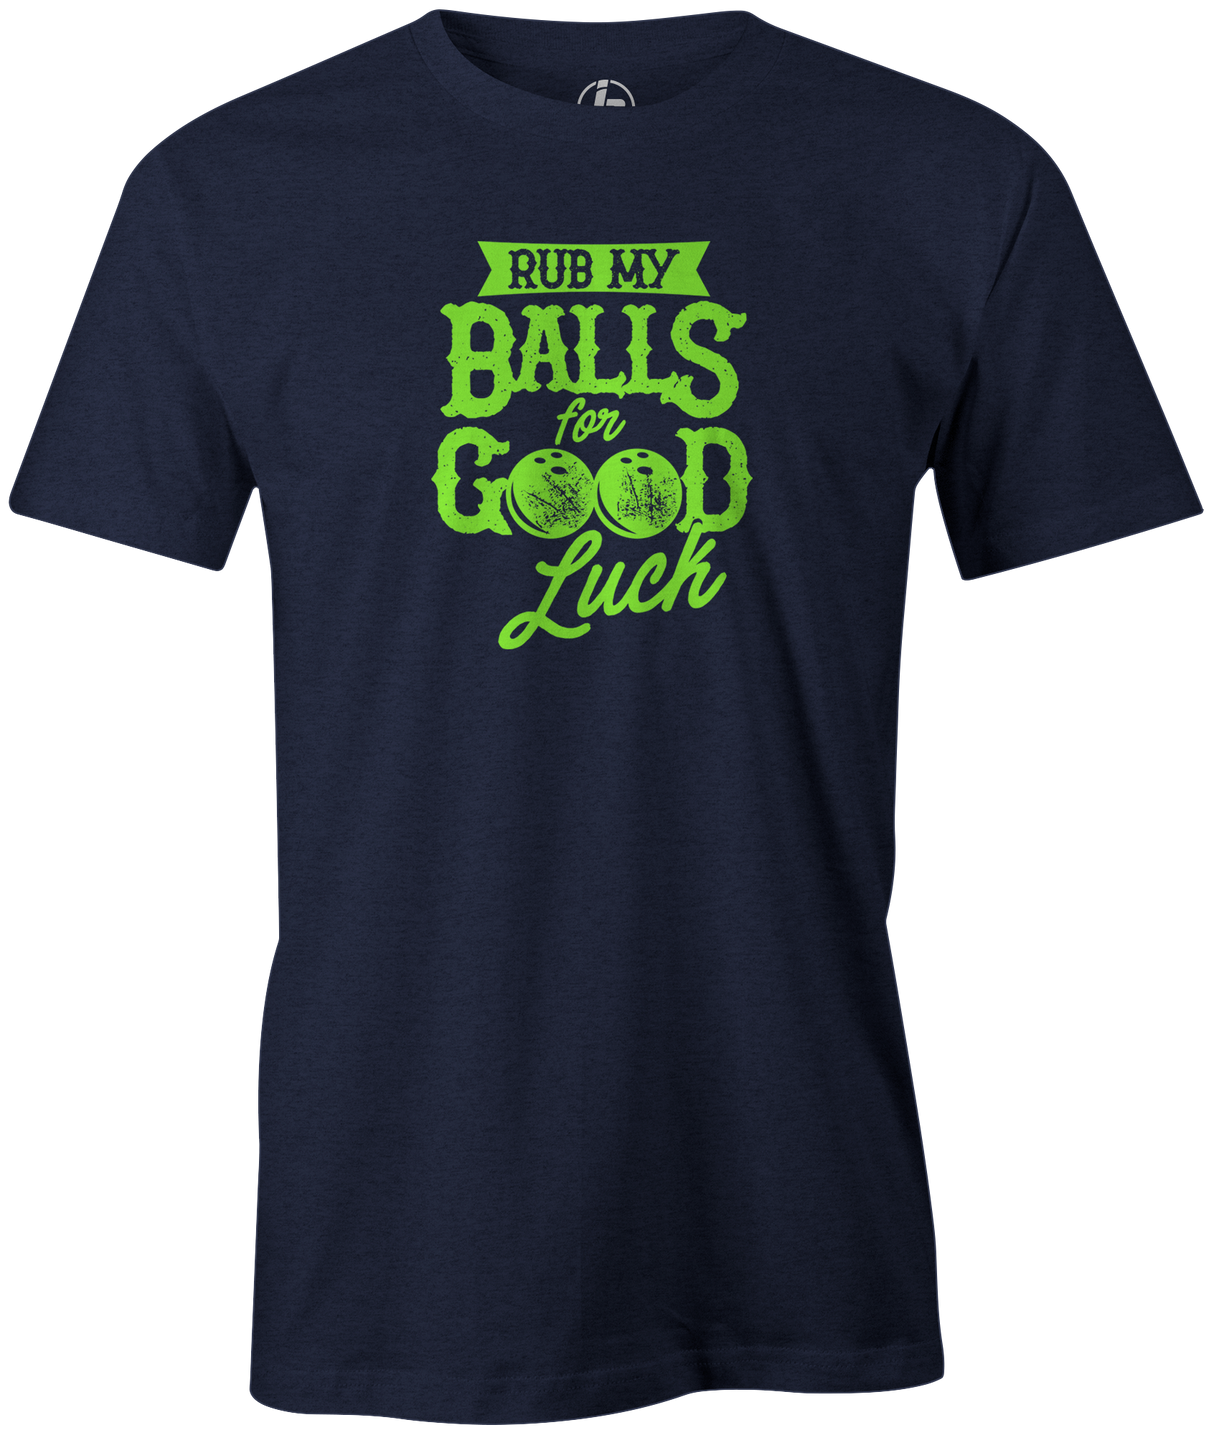 Rub your balls real nice and long to strike more! Grab your balls and head to the lanes for some bowling and chill. A perfect shirt for a bowling date night with your girlfriend or boyfriend. Have fun with this funny bowling tshirt design. Night out with friends bowling. Crazy bowl. bowlingshirt. 